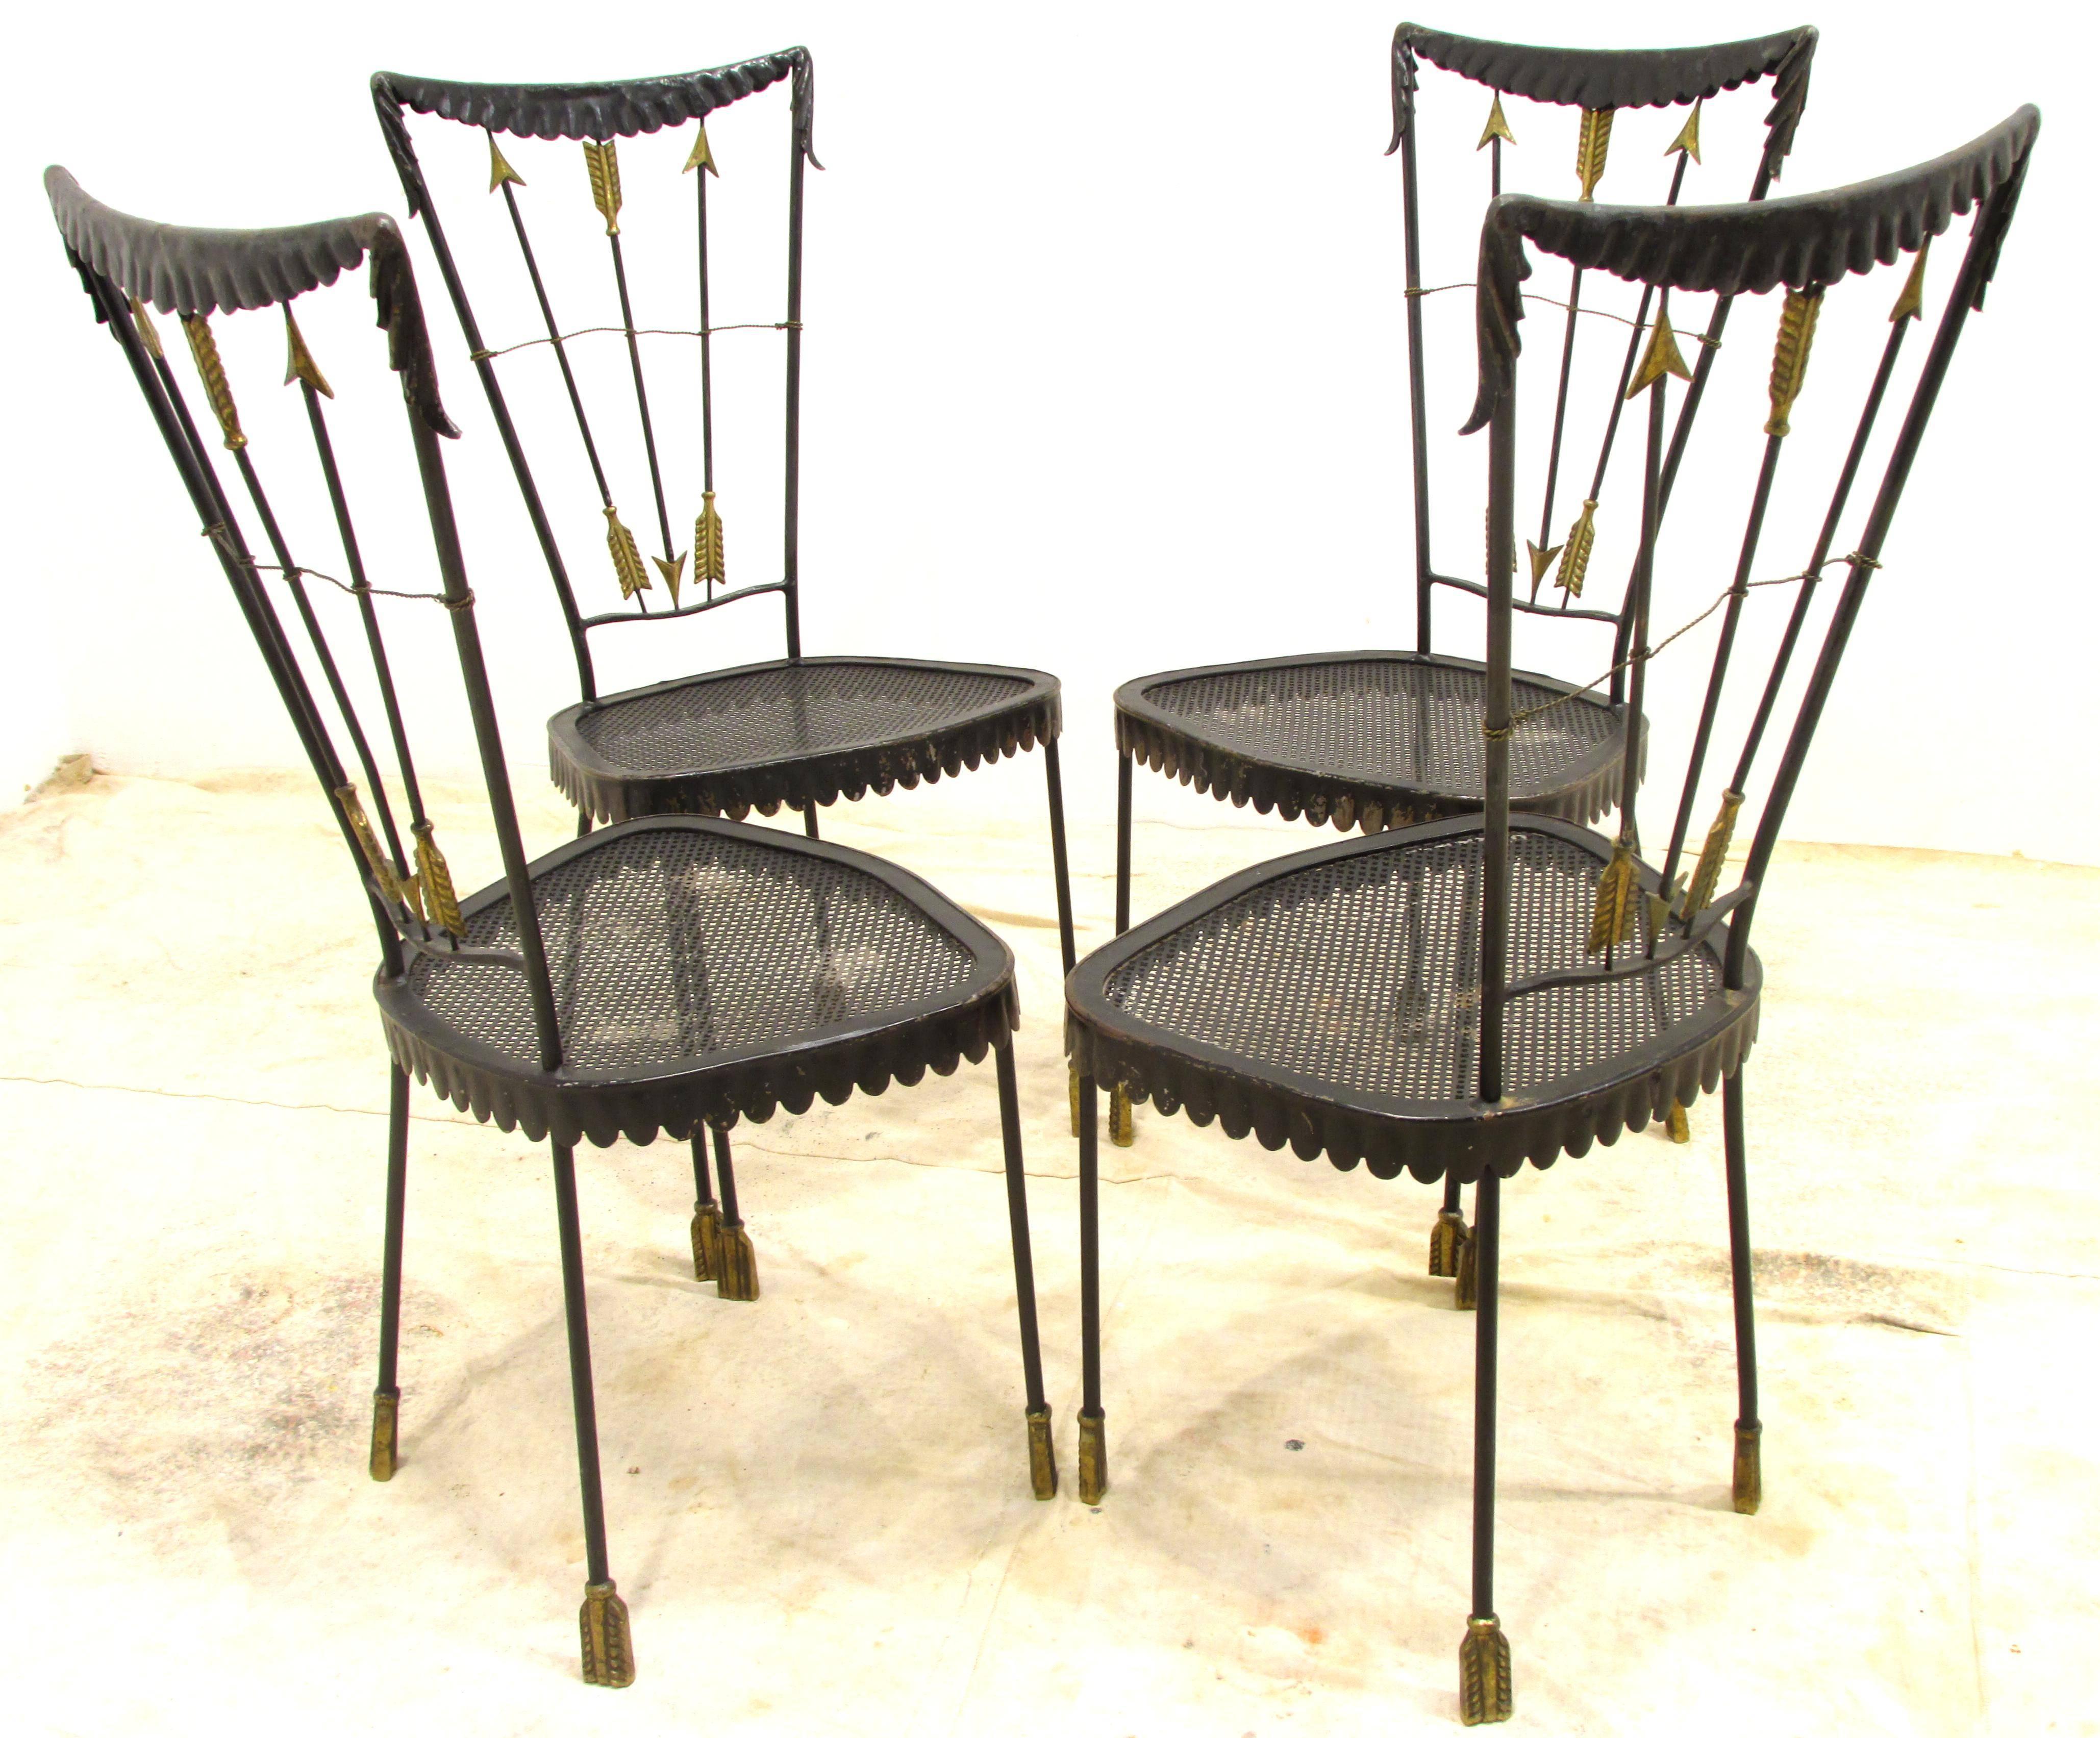 Set of four neoclassical style chairs painted metal with brass arrow motif accents by Tomaso Buzzi.